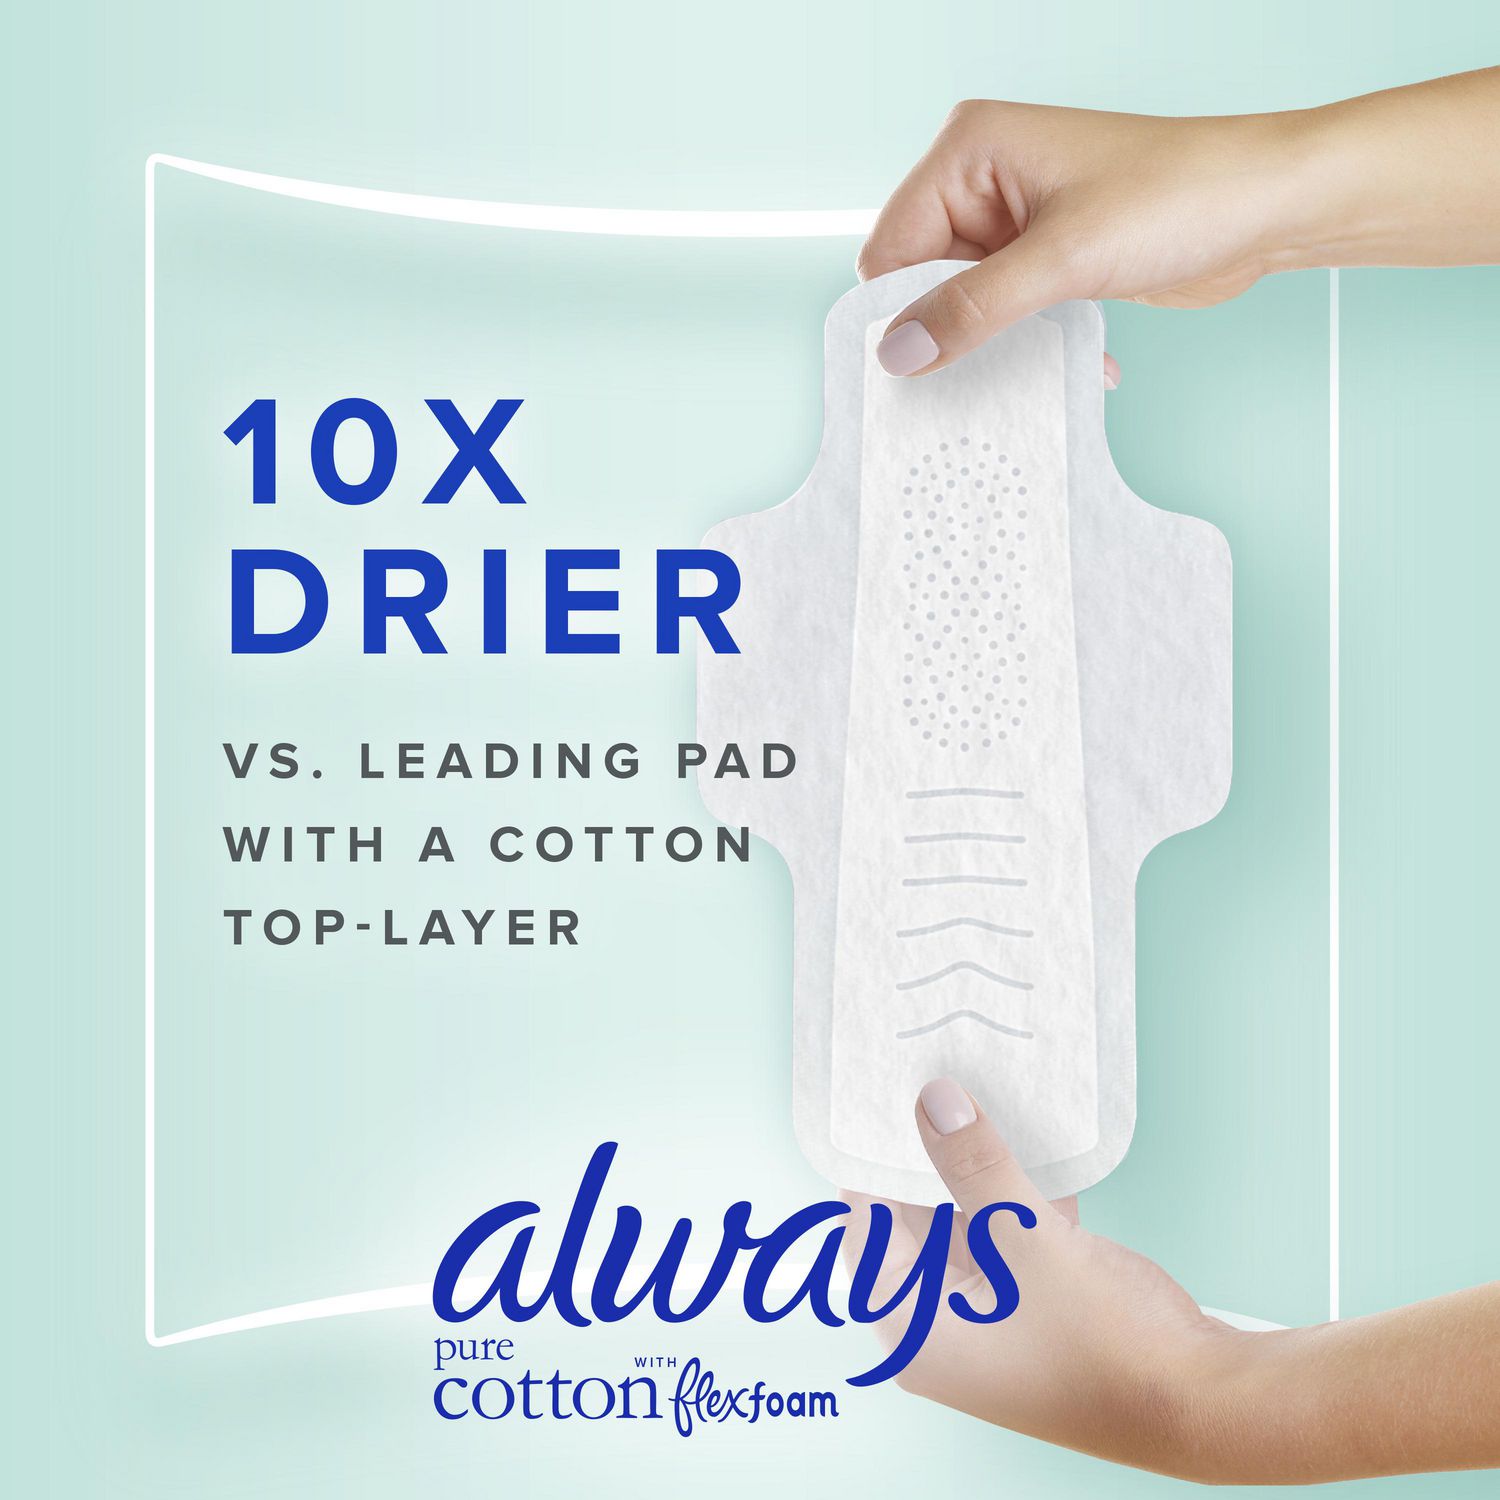 Stayfree ® Everyday Panty Liners, Flexicomfort, Cotton Touch